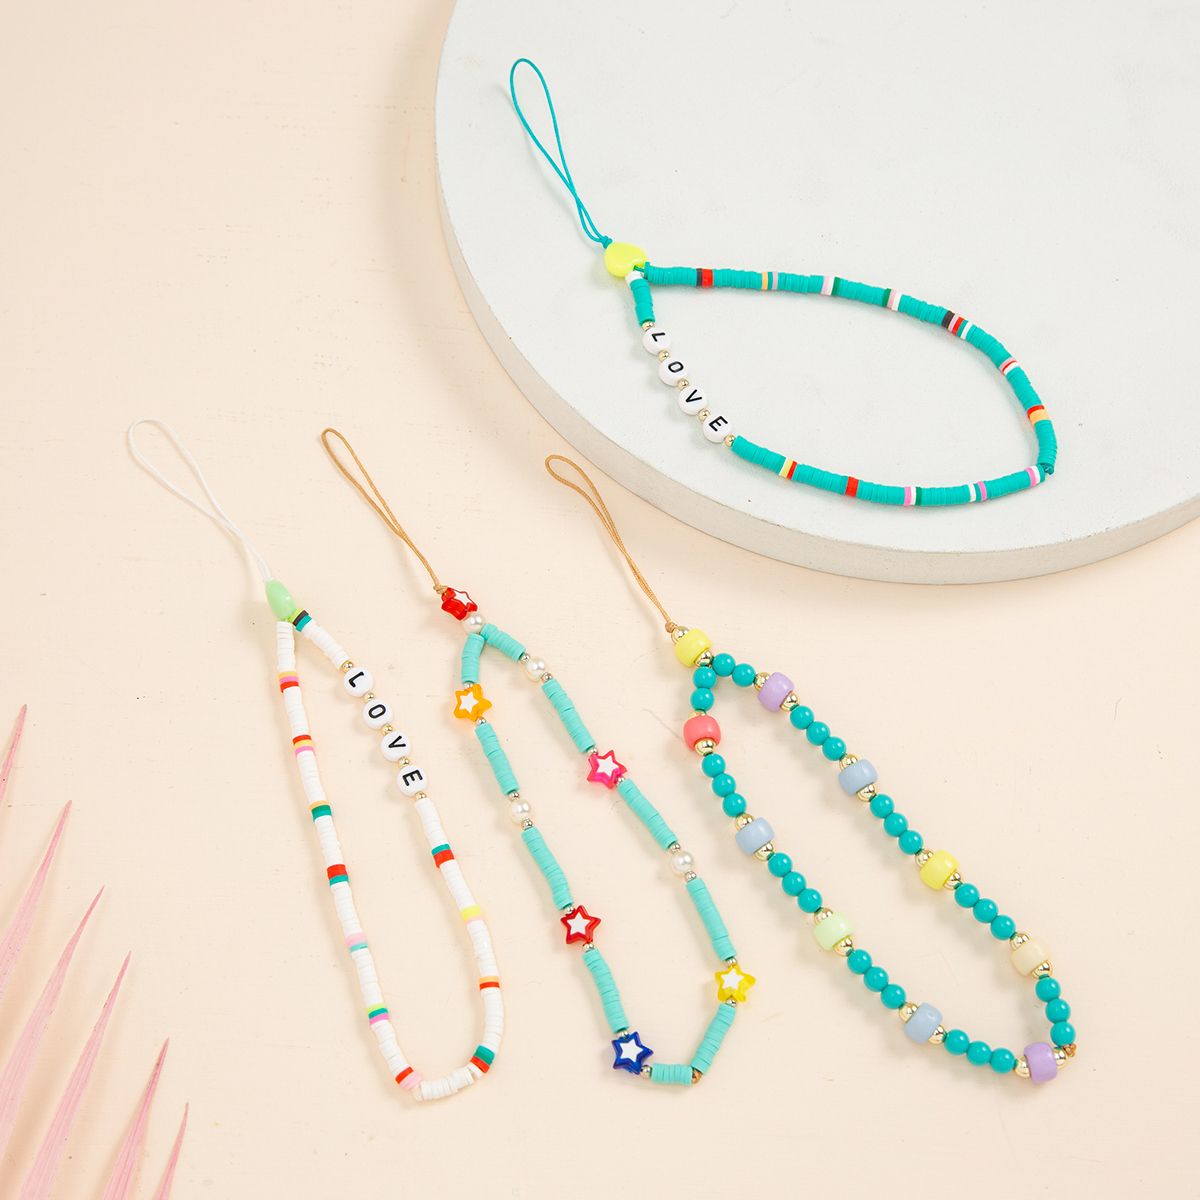 GONGRUOQIUSHAN New Anti-Lost Women Acrylic Bead Mobile Phone Strap Lanyard Soft Pottery Rope Cell Phone Case Hanging Cord Phone Chain